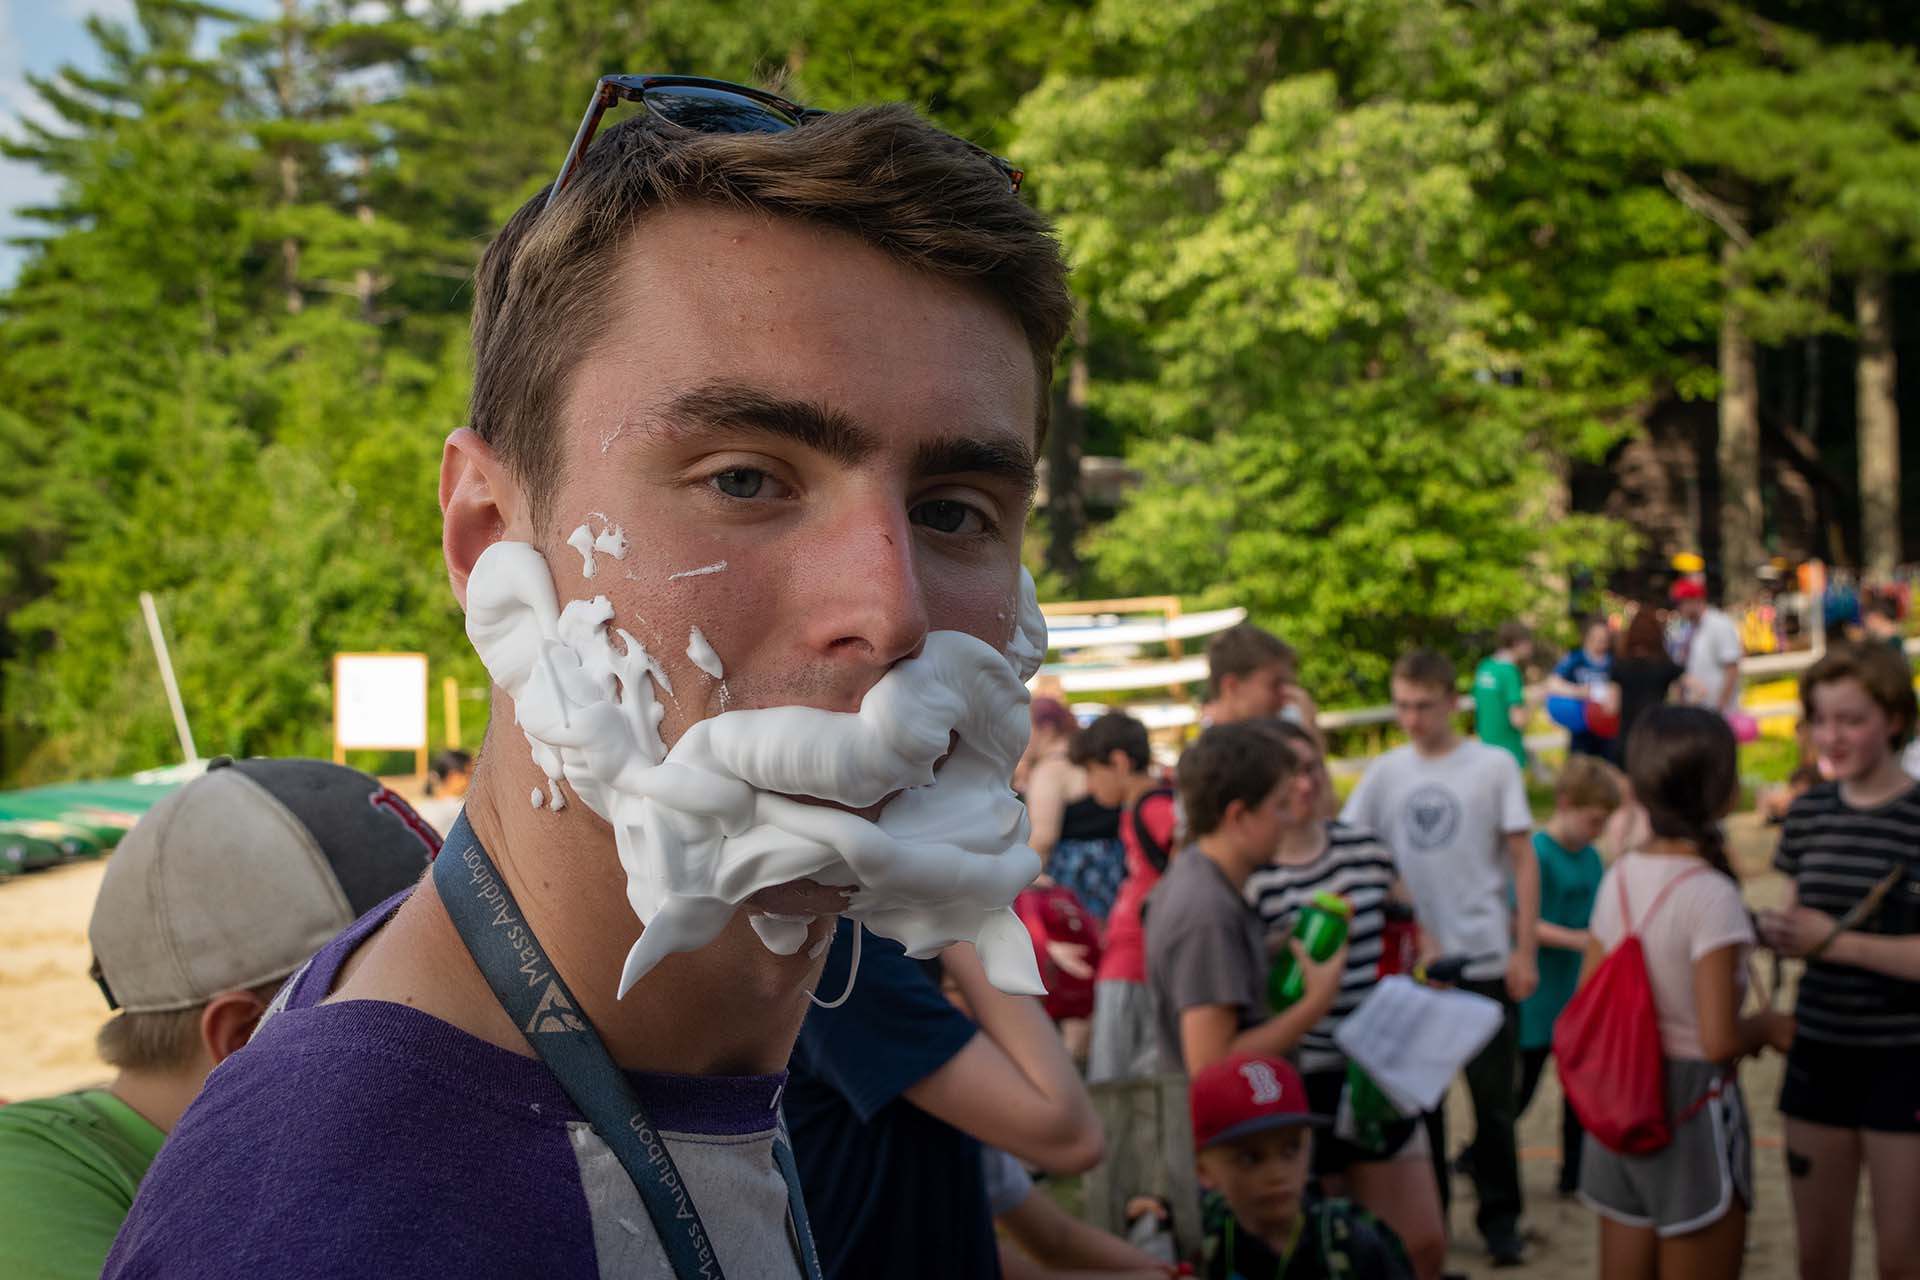 Person with shaving cream spread across their face.